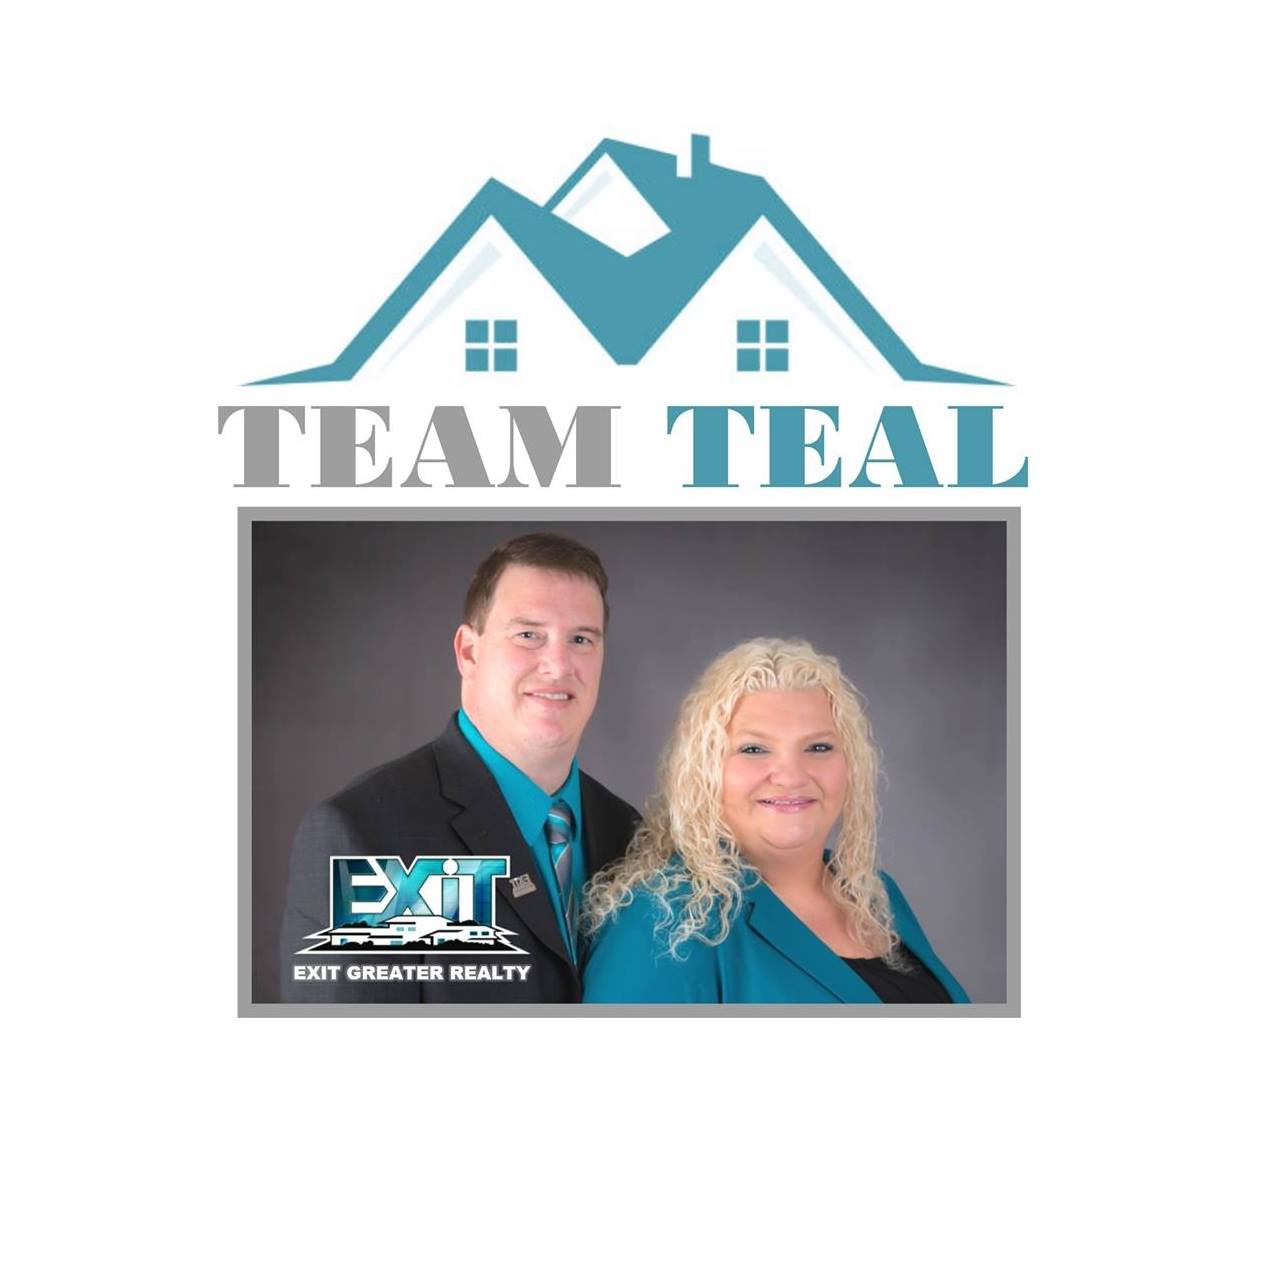 Lana Mohs - Broker Owner/ Realtor EXIT Greater Realty